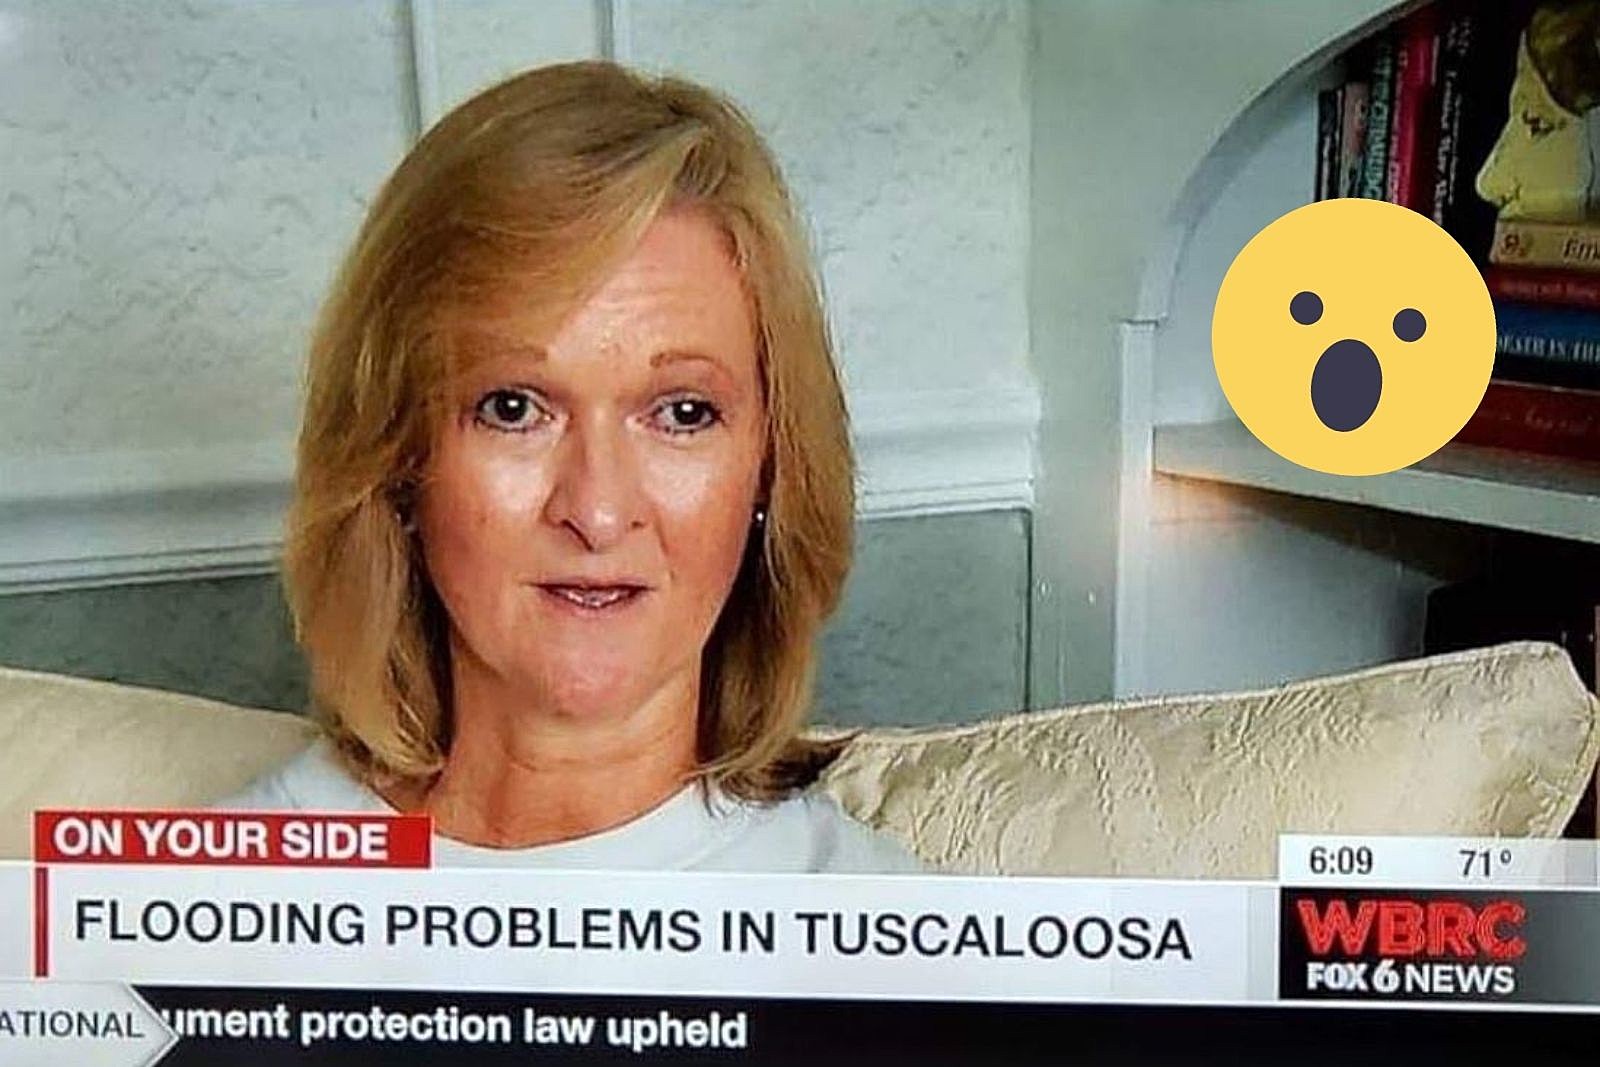 Tuscaloosa, Alabama TV Crew Capture NSFW Moment in Interview